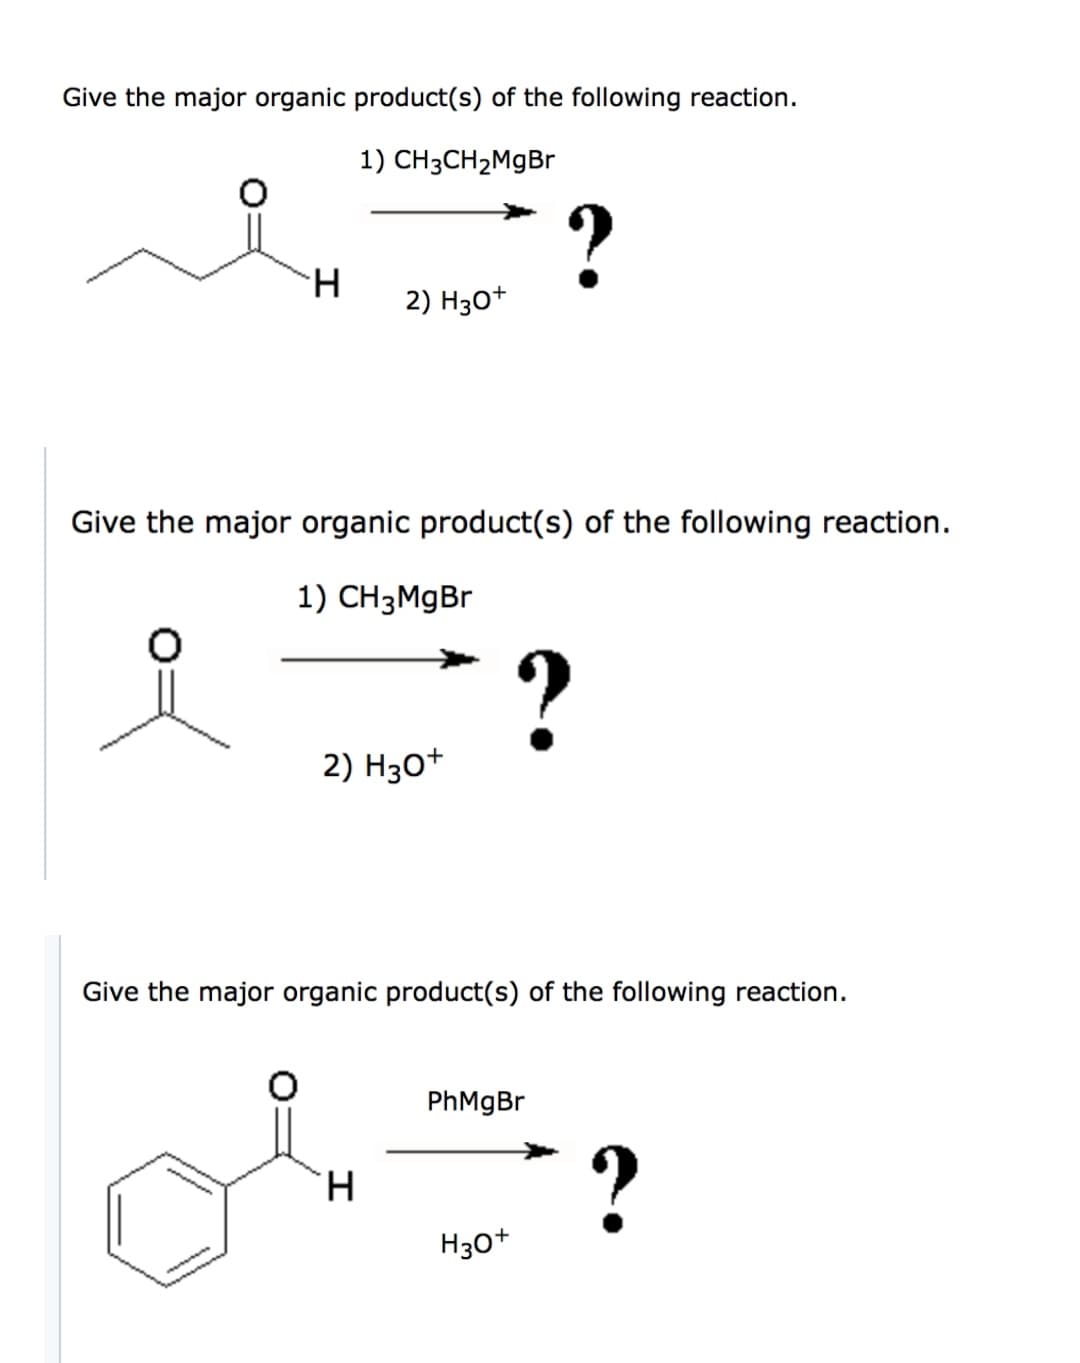 Give the major organic product(s) of the following reaction.
1) CH3CH2M9B
H.
2) Hзо*
Give the major organic product(s) of the foll
ng reaction.
1) CHзMgBr
2) H30+
Give the major organic product(s) of the following reaction.
PhMgBr
H.
H30*
